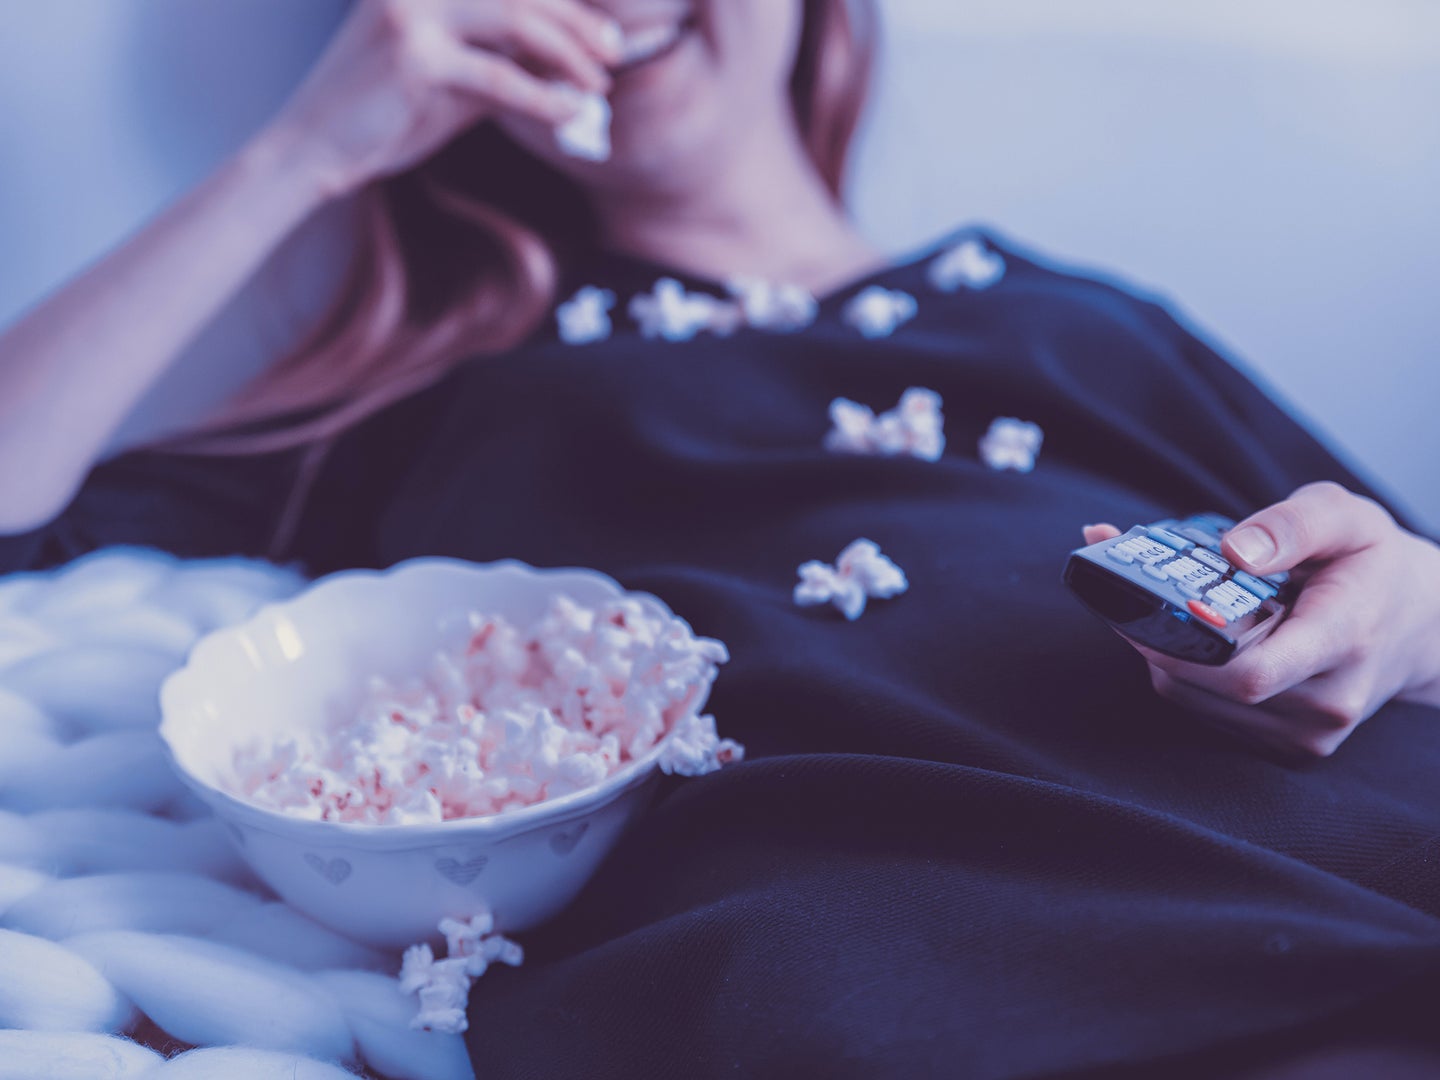 Person watching TV and eating popcorn in bed